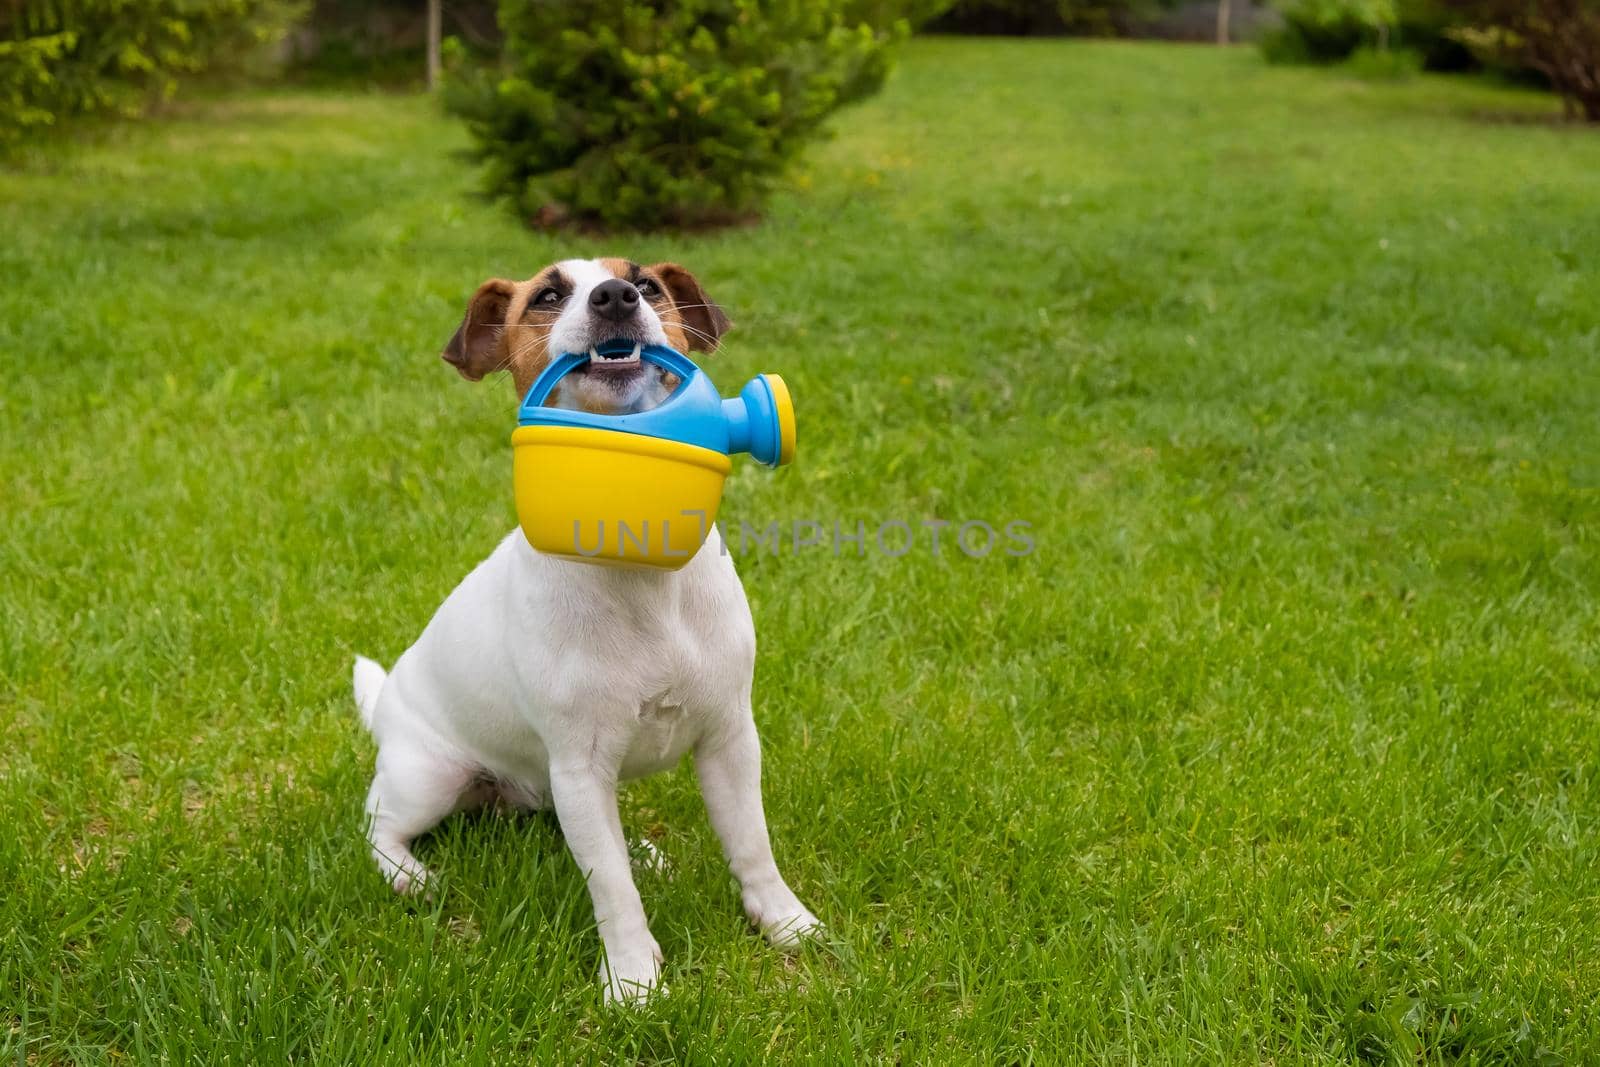 Dog Jack Russell Terrier stands on the lawn and holds a watering can by mrwed54